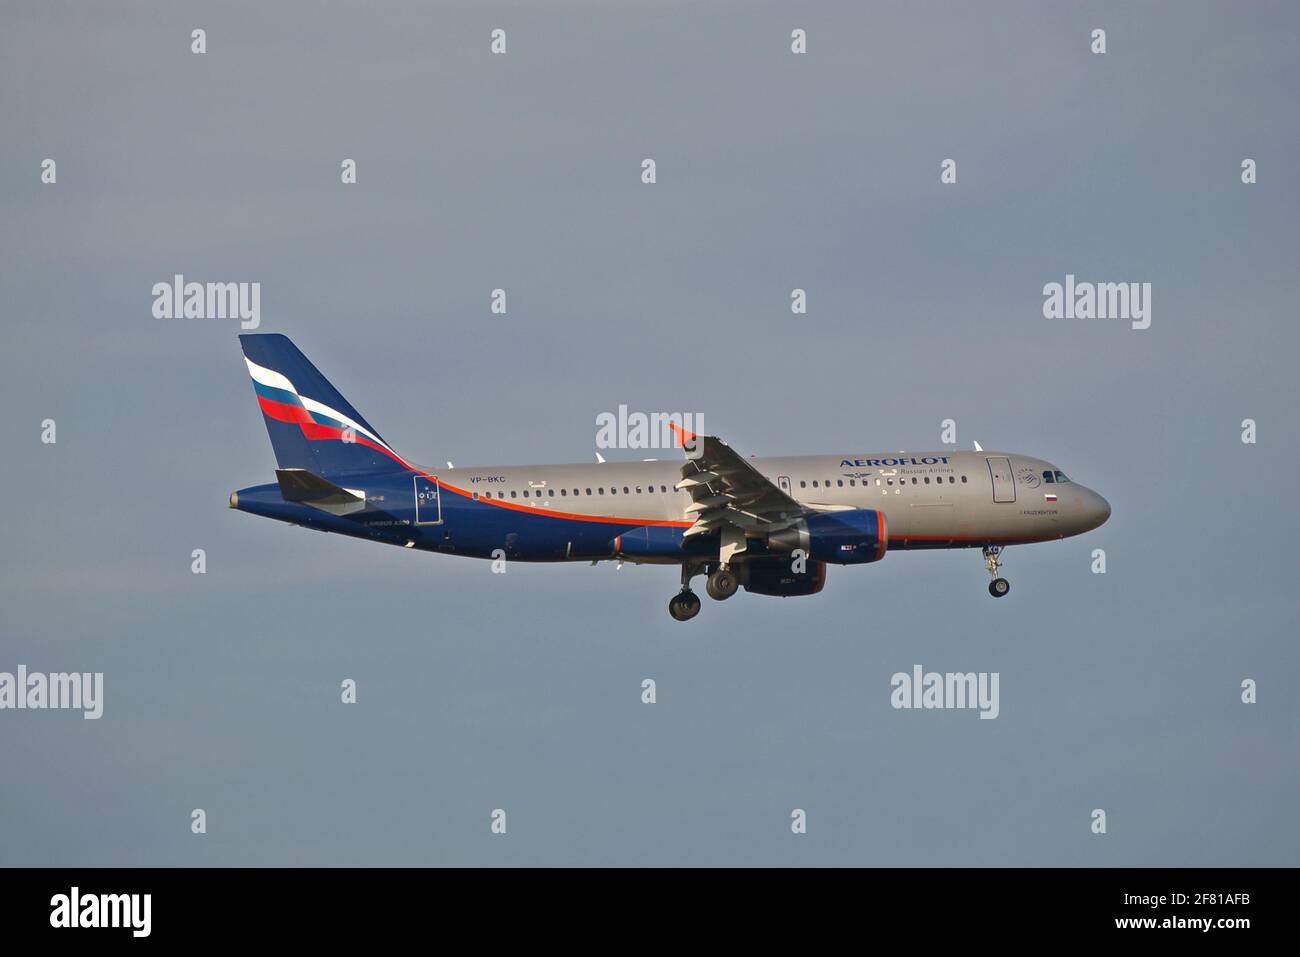 Düsseldorf, Germany - December 14, 2008: Airbus A320-200 of Aeroflot at the airport of Düsseldorf while final approach Stock Photo